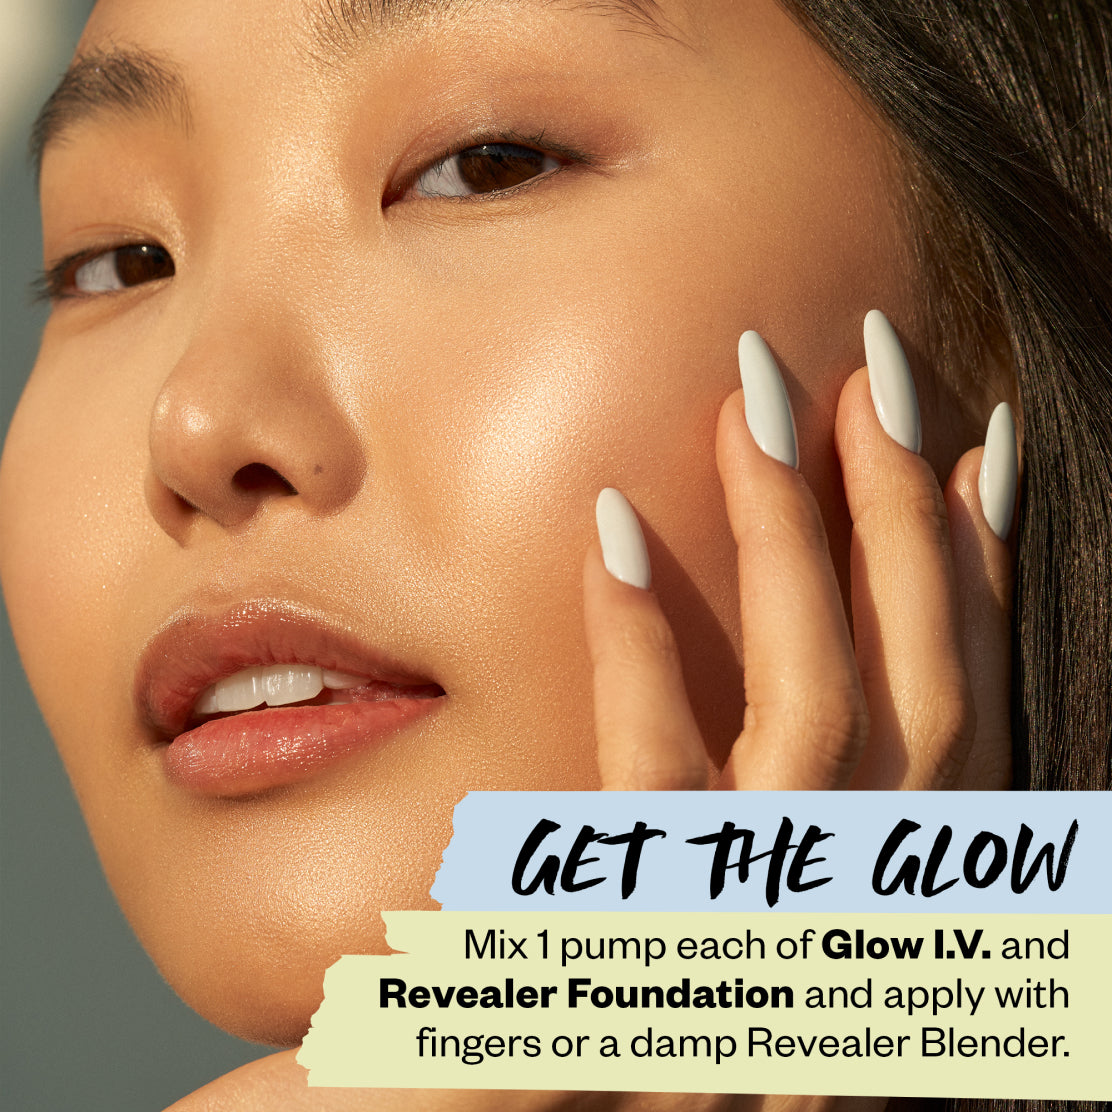 Close up image of model. Get the glow mix 1 pump each of Glow I.V. and Revealer Foundation and apply with fingers or a damp Revealer Blender.